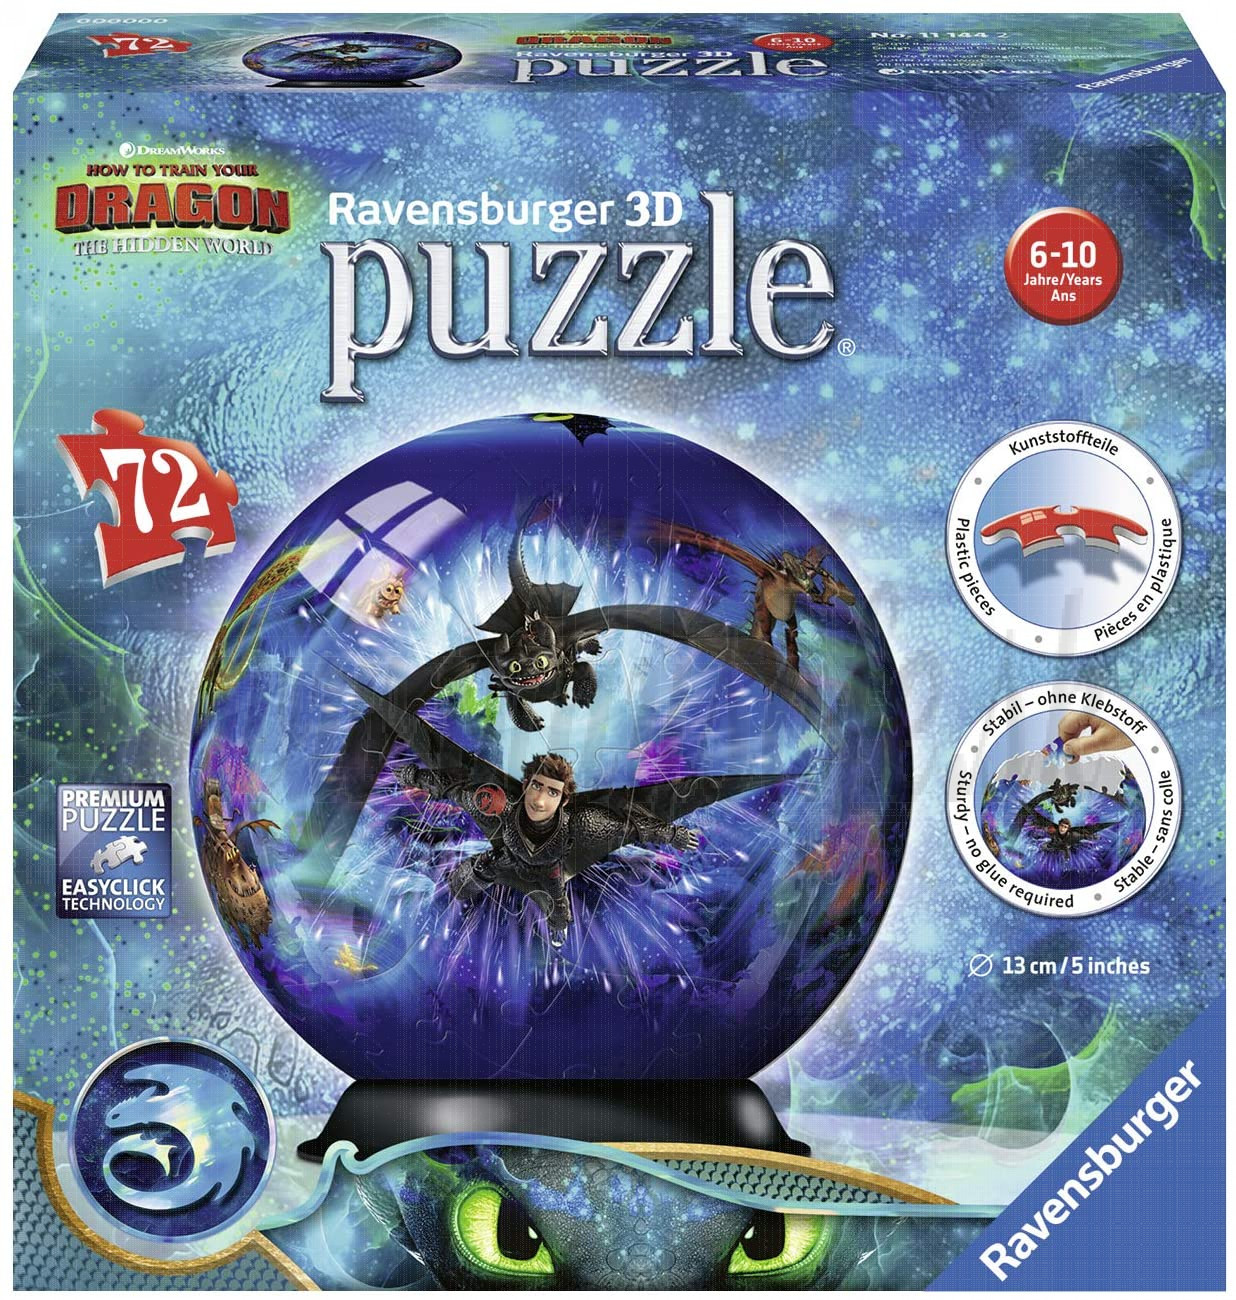 Ravensburger 3D Puzzle How to train your dragon